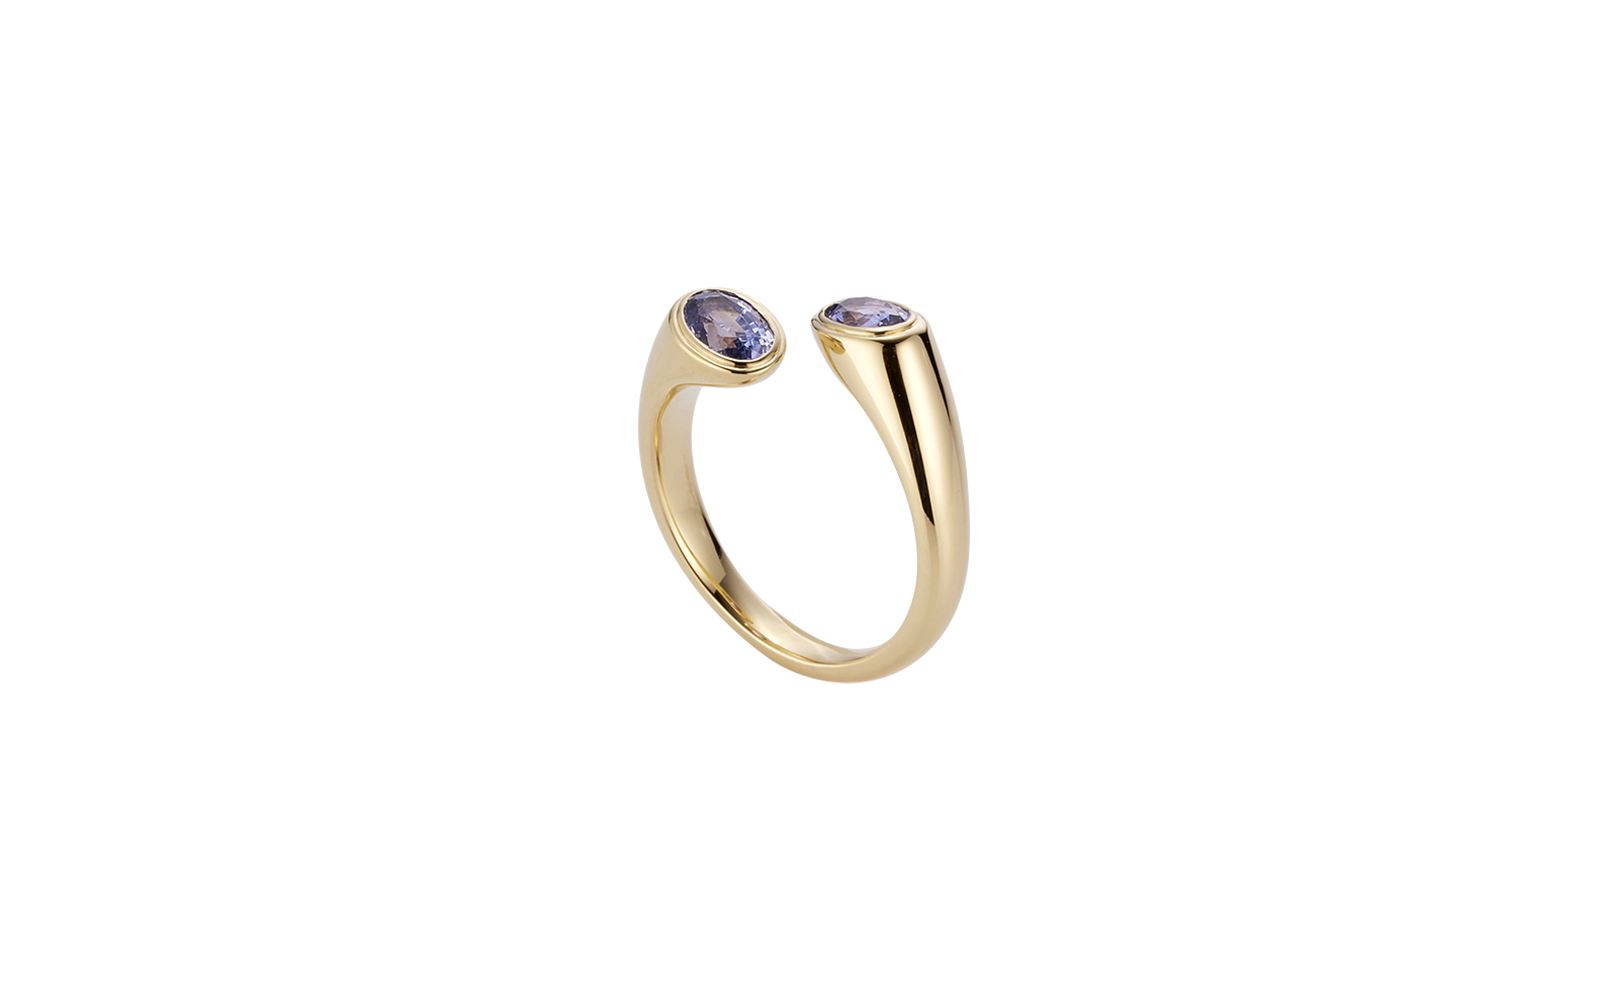 Twin Flame Lavender Ceylon Sapphire Ring Yellow Gold